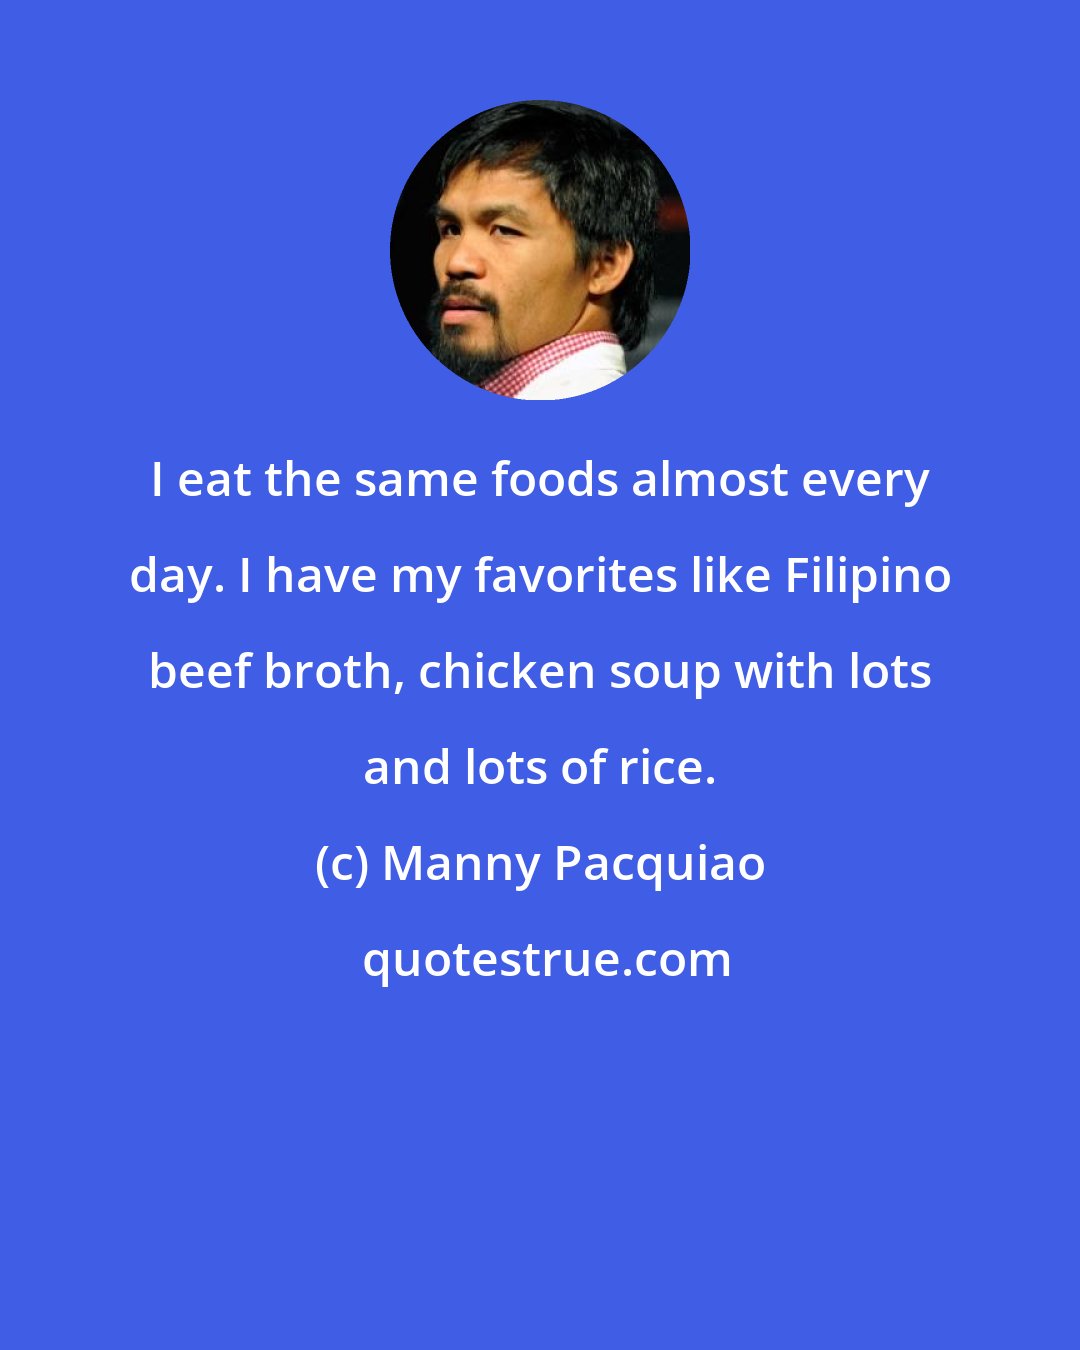 Manny Pacquiao: I eat the same foods almost every day. I have my favorites like Filipino beef broth, chicken soup with lots and lots of rice.